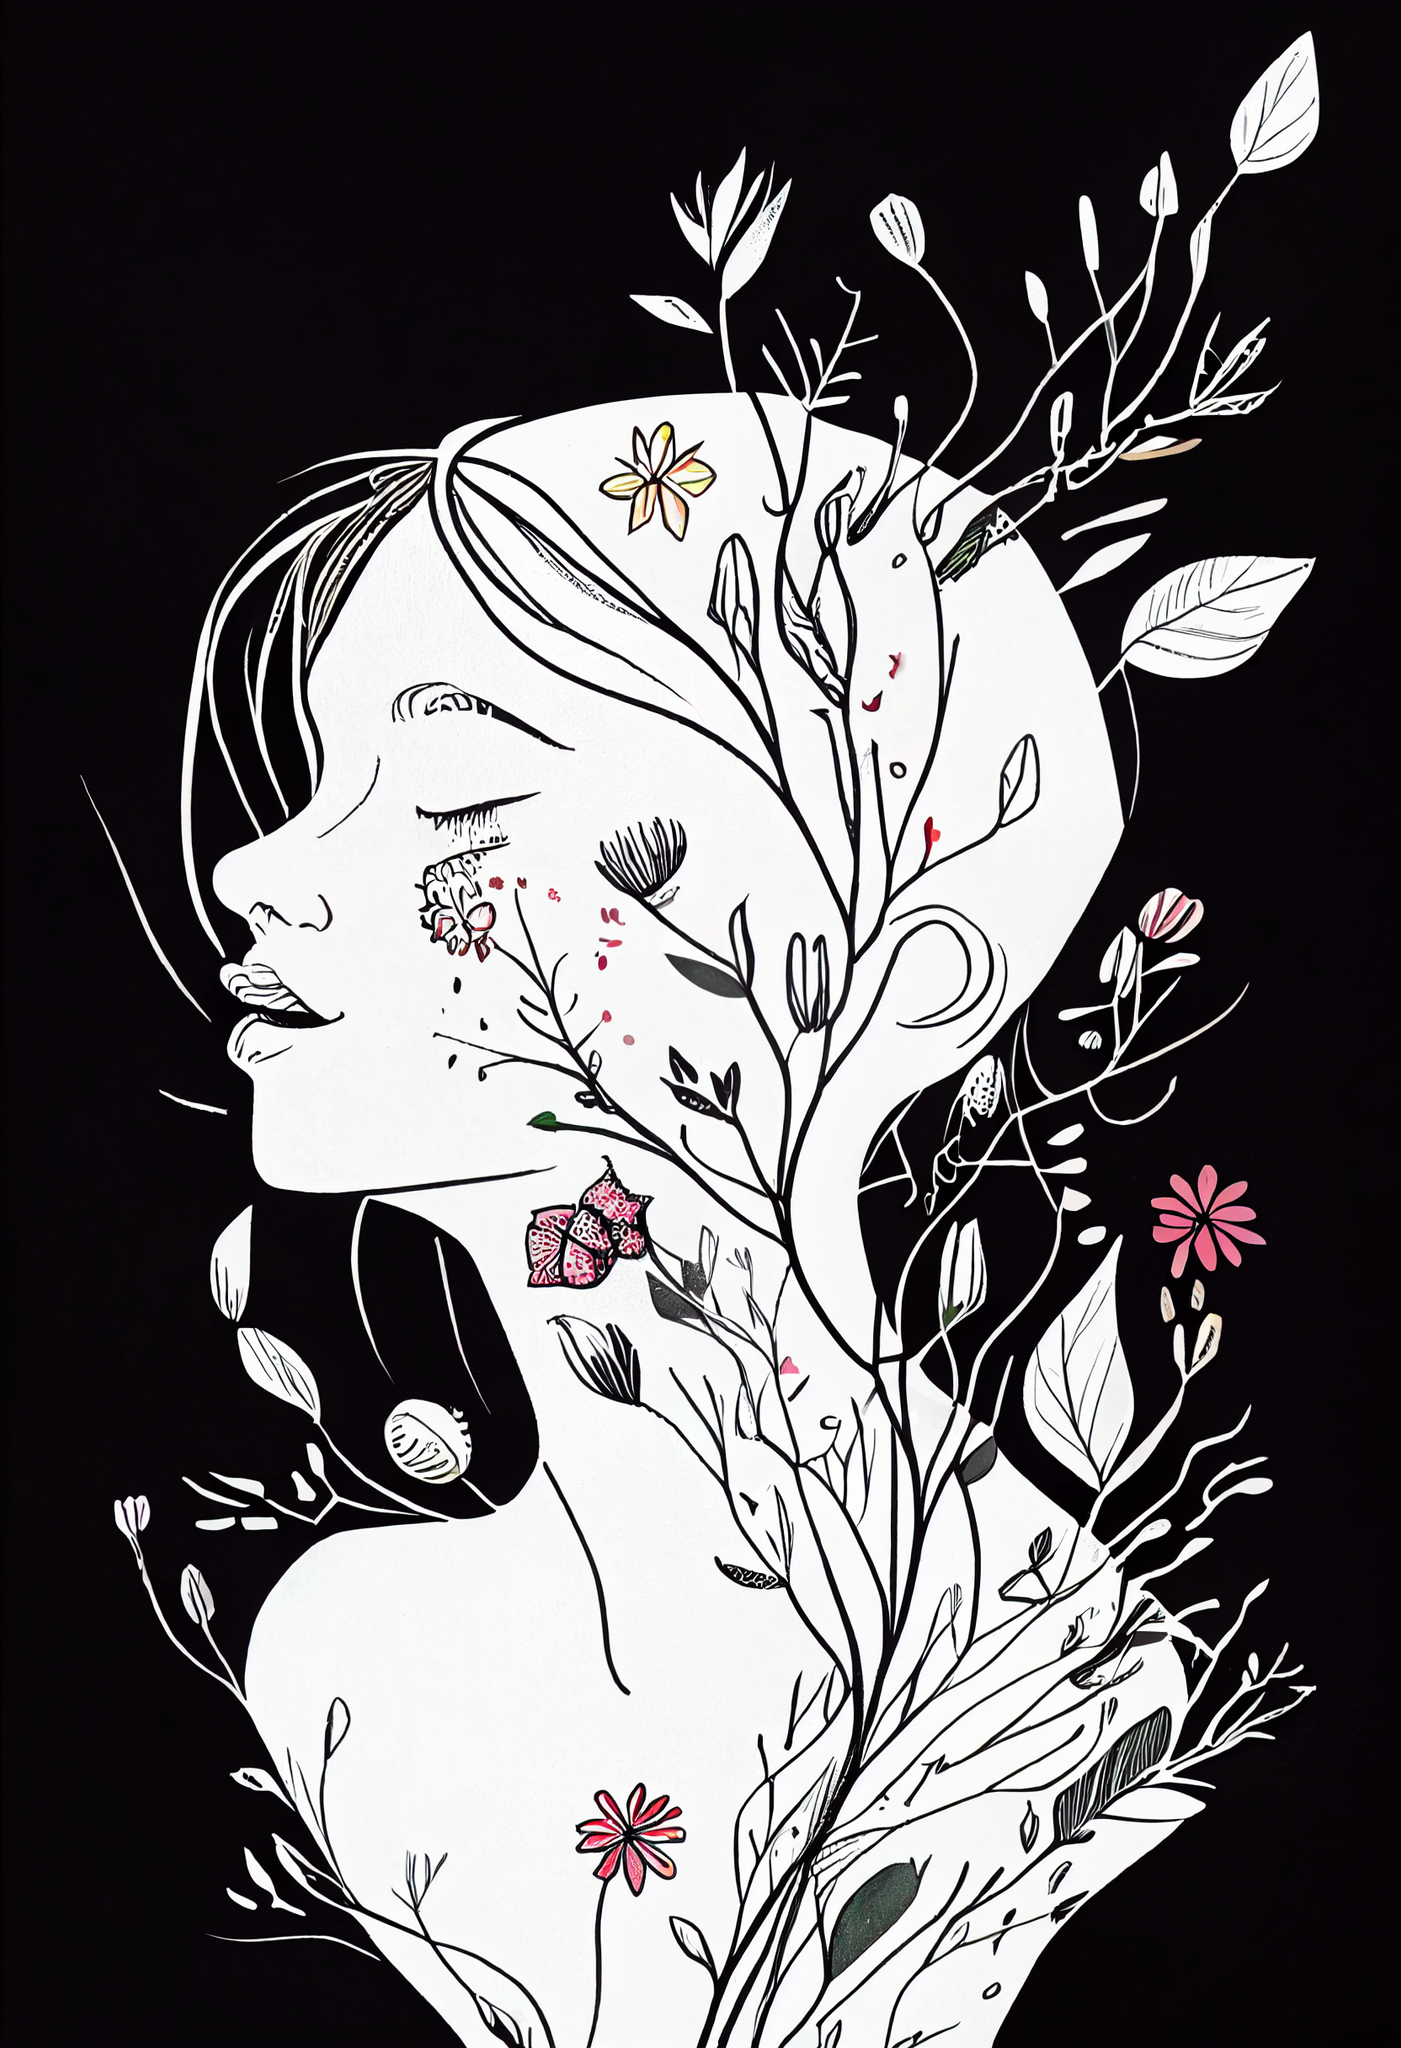 Flower Print: A Captivating Line Art of a Woman Fashioned from Delicate Flowers on a Striking Black Background